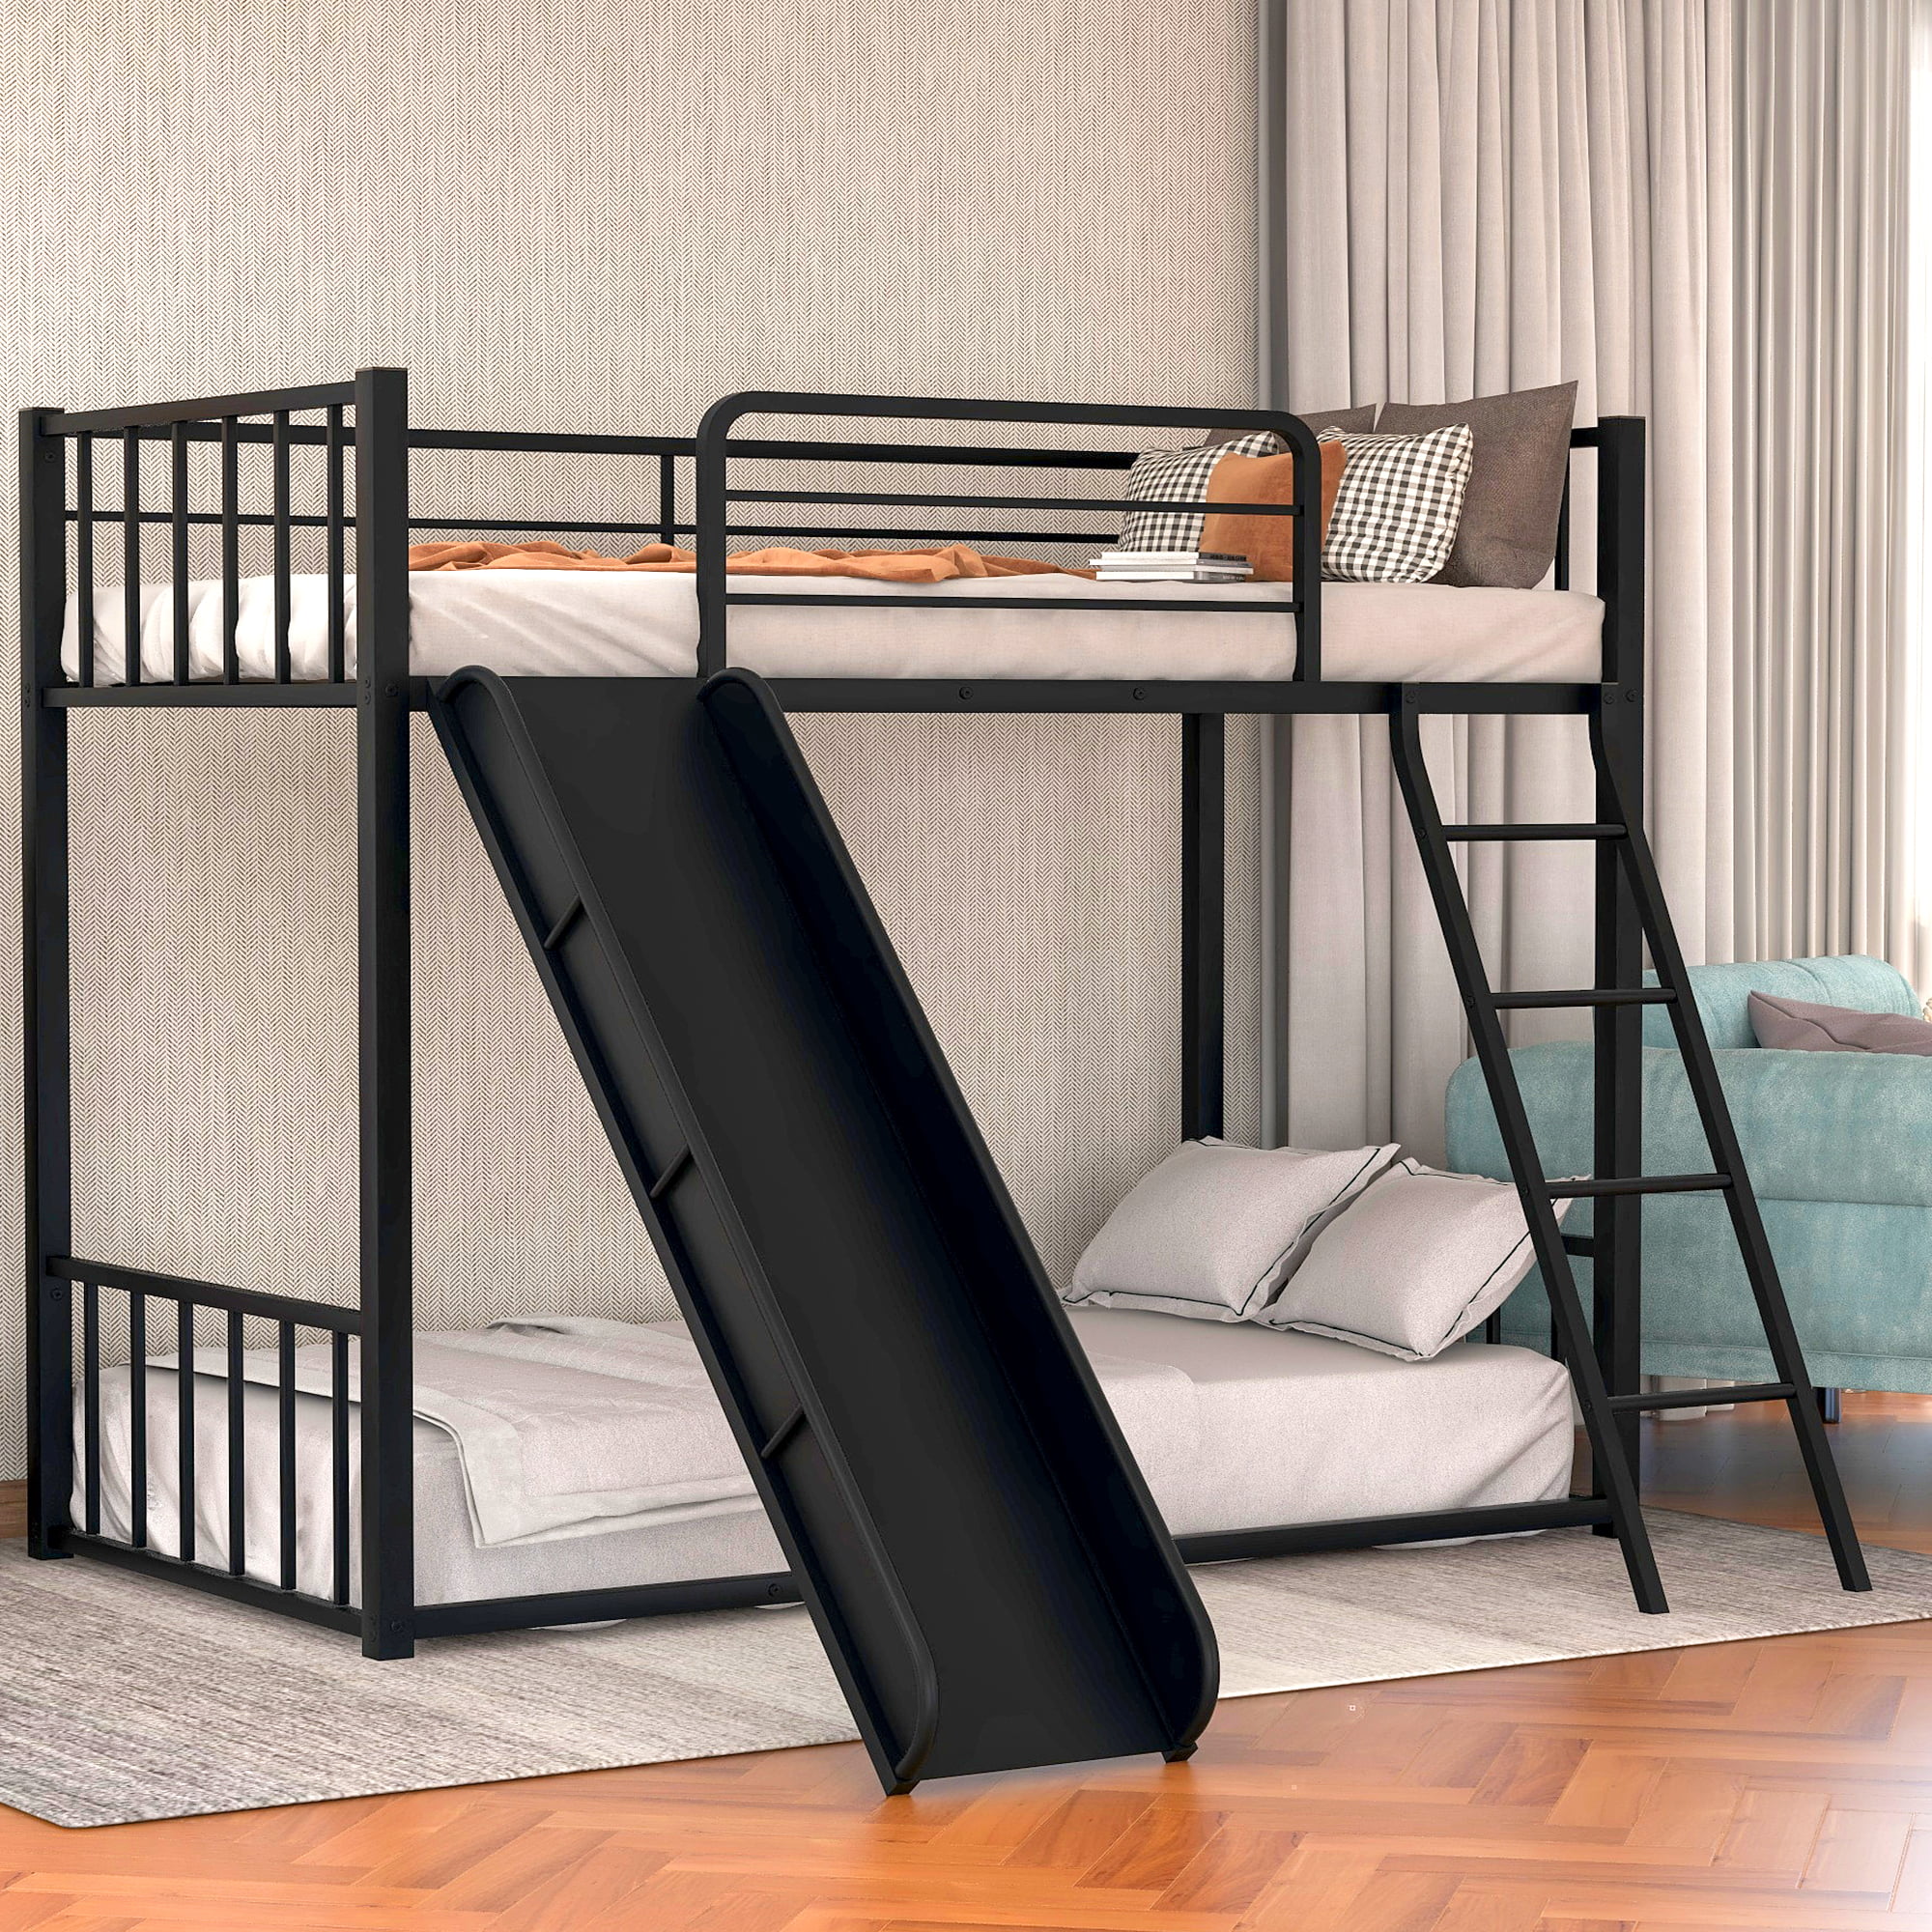 Euroco Metal Bunk Bed Twin Over, Detachable Slide For Bunk Bed